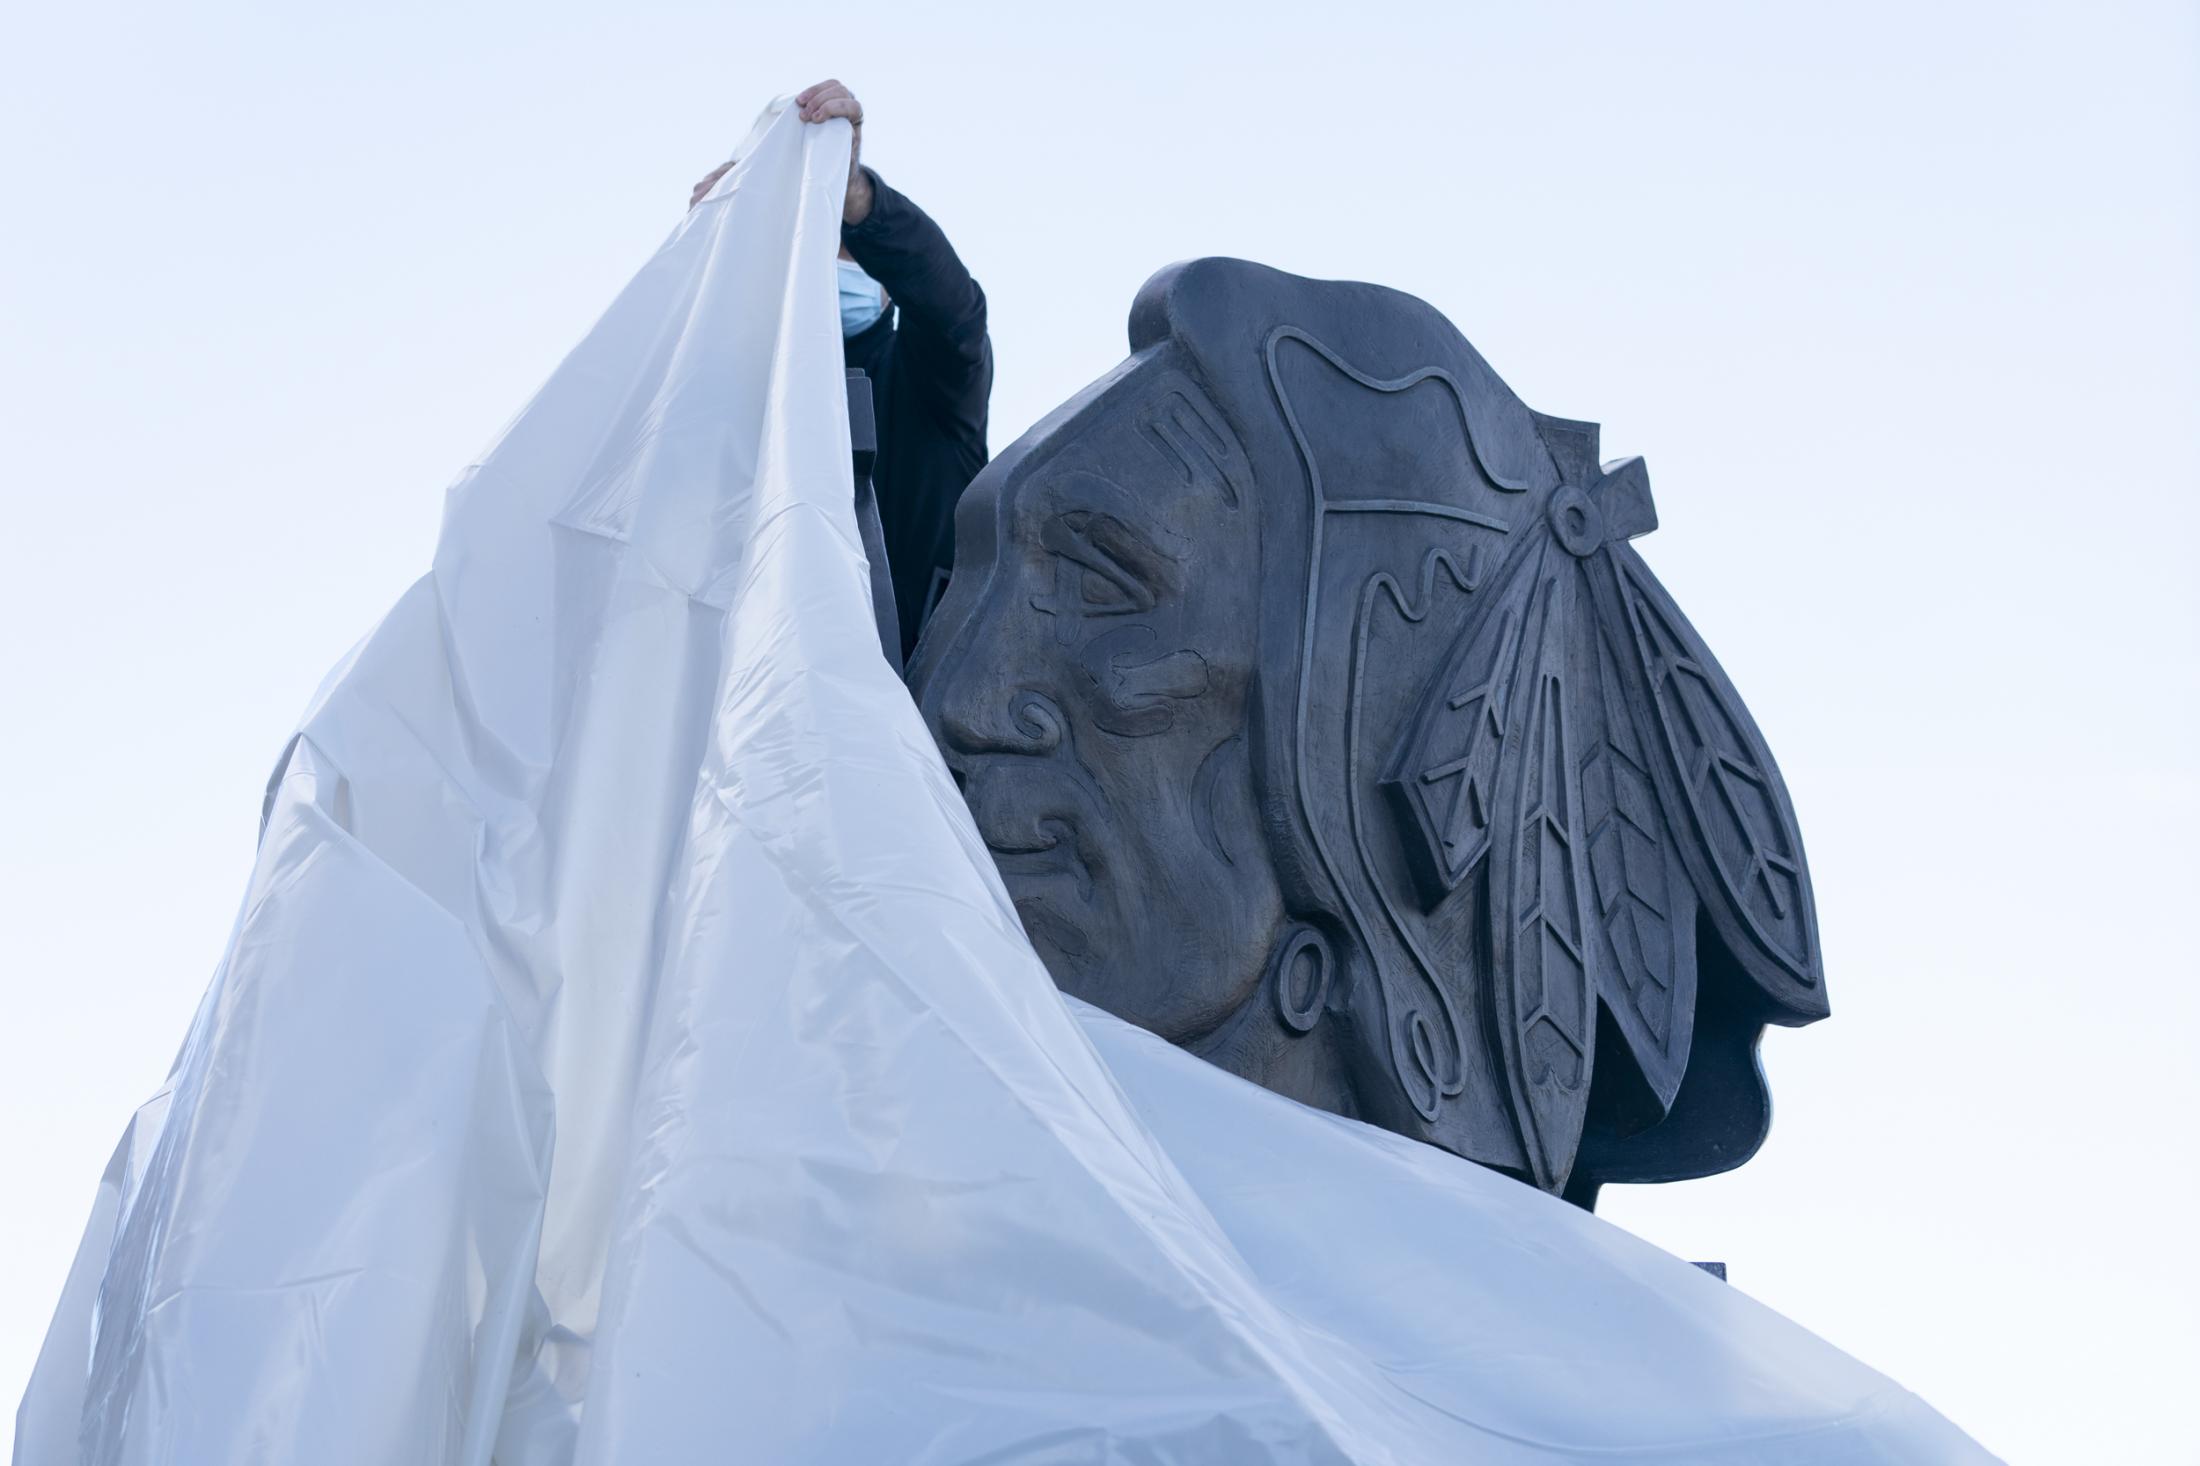 A crew member covers up the Blackhawks logo statue outside United Center in Chicago on Tuesday, Oct. 13, 2020, a day after it was covered in...